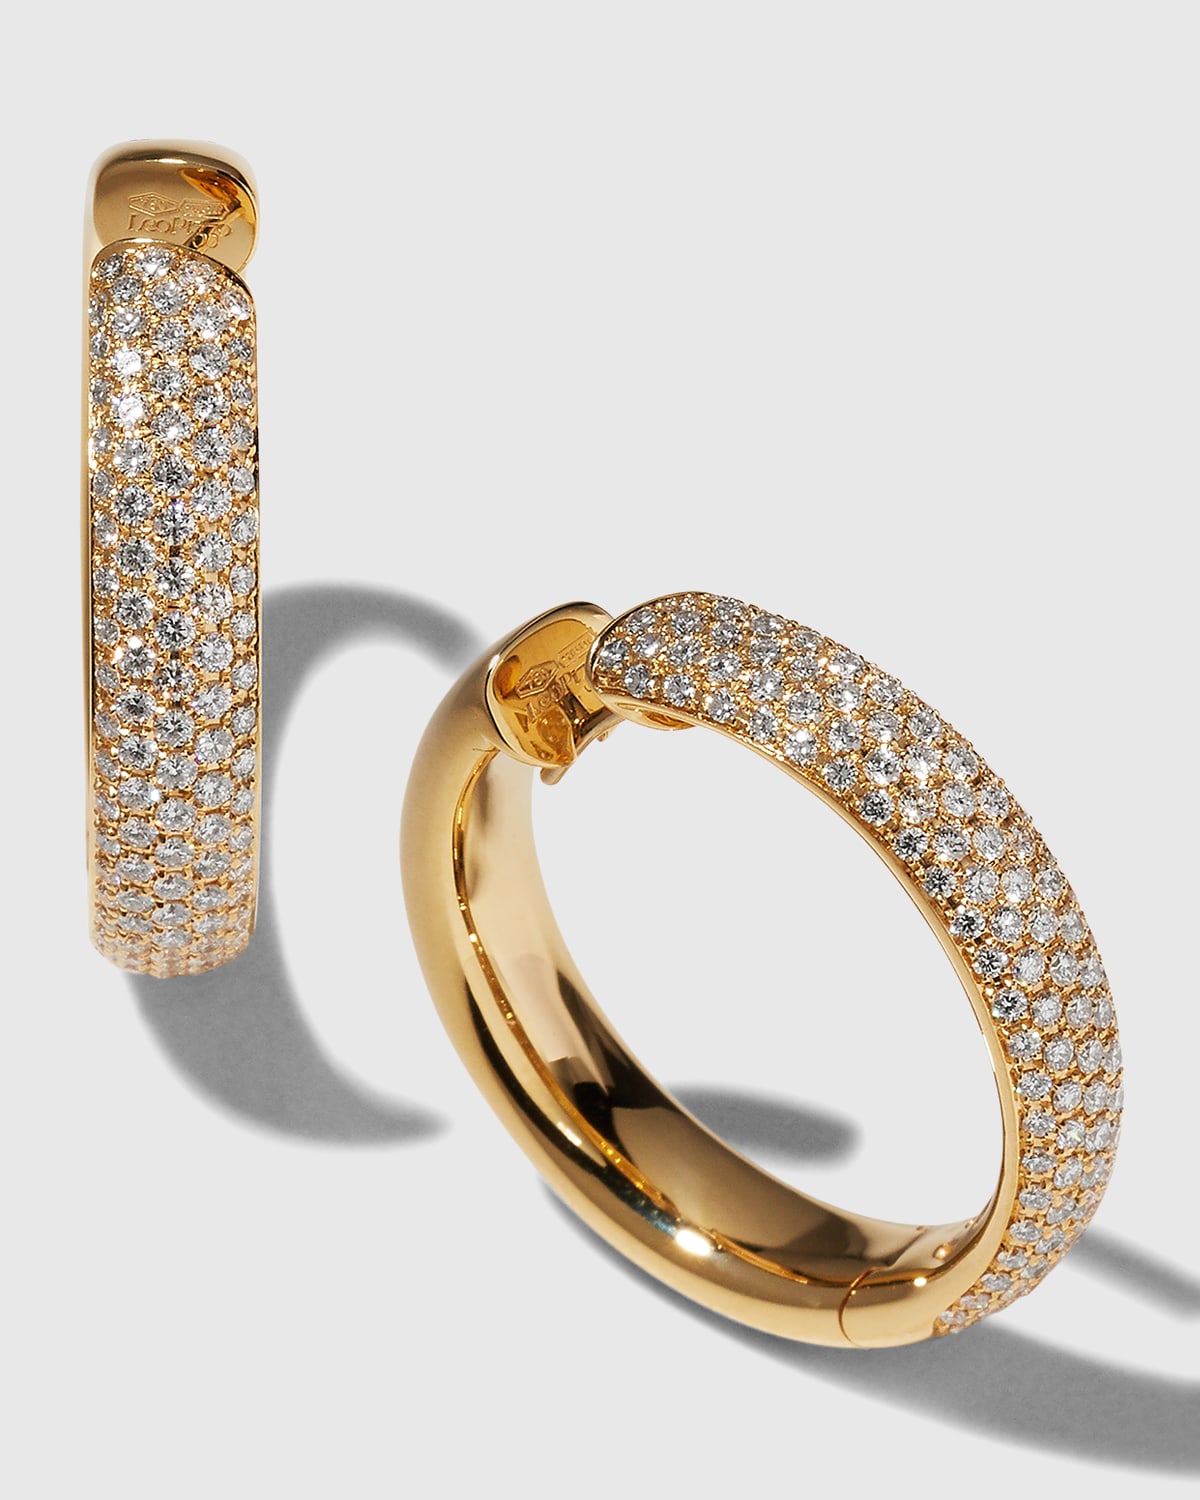 Yellow Gold Pave Round Hoop Earrings